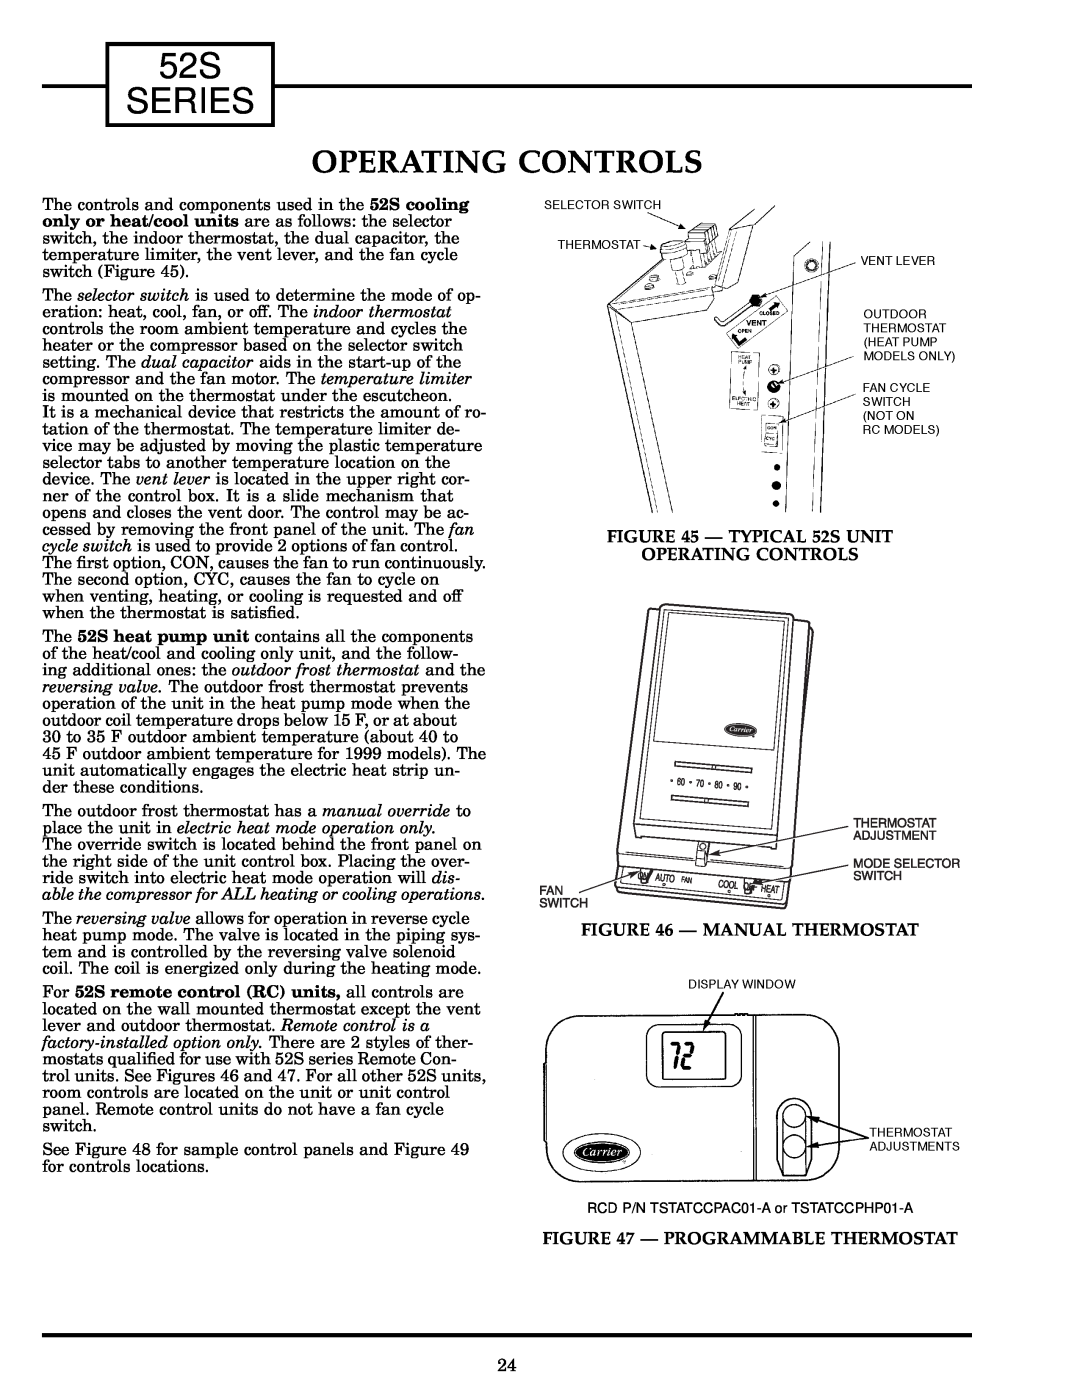 Carrier manual Operating Controls, Ð TYPICAL 52S UNIT OPERATING CONTROLS, Ð Manual Thermostat, Ð Programmable Thermostat 